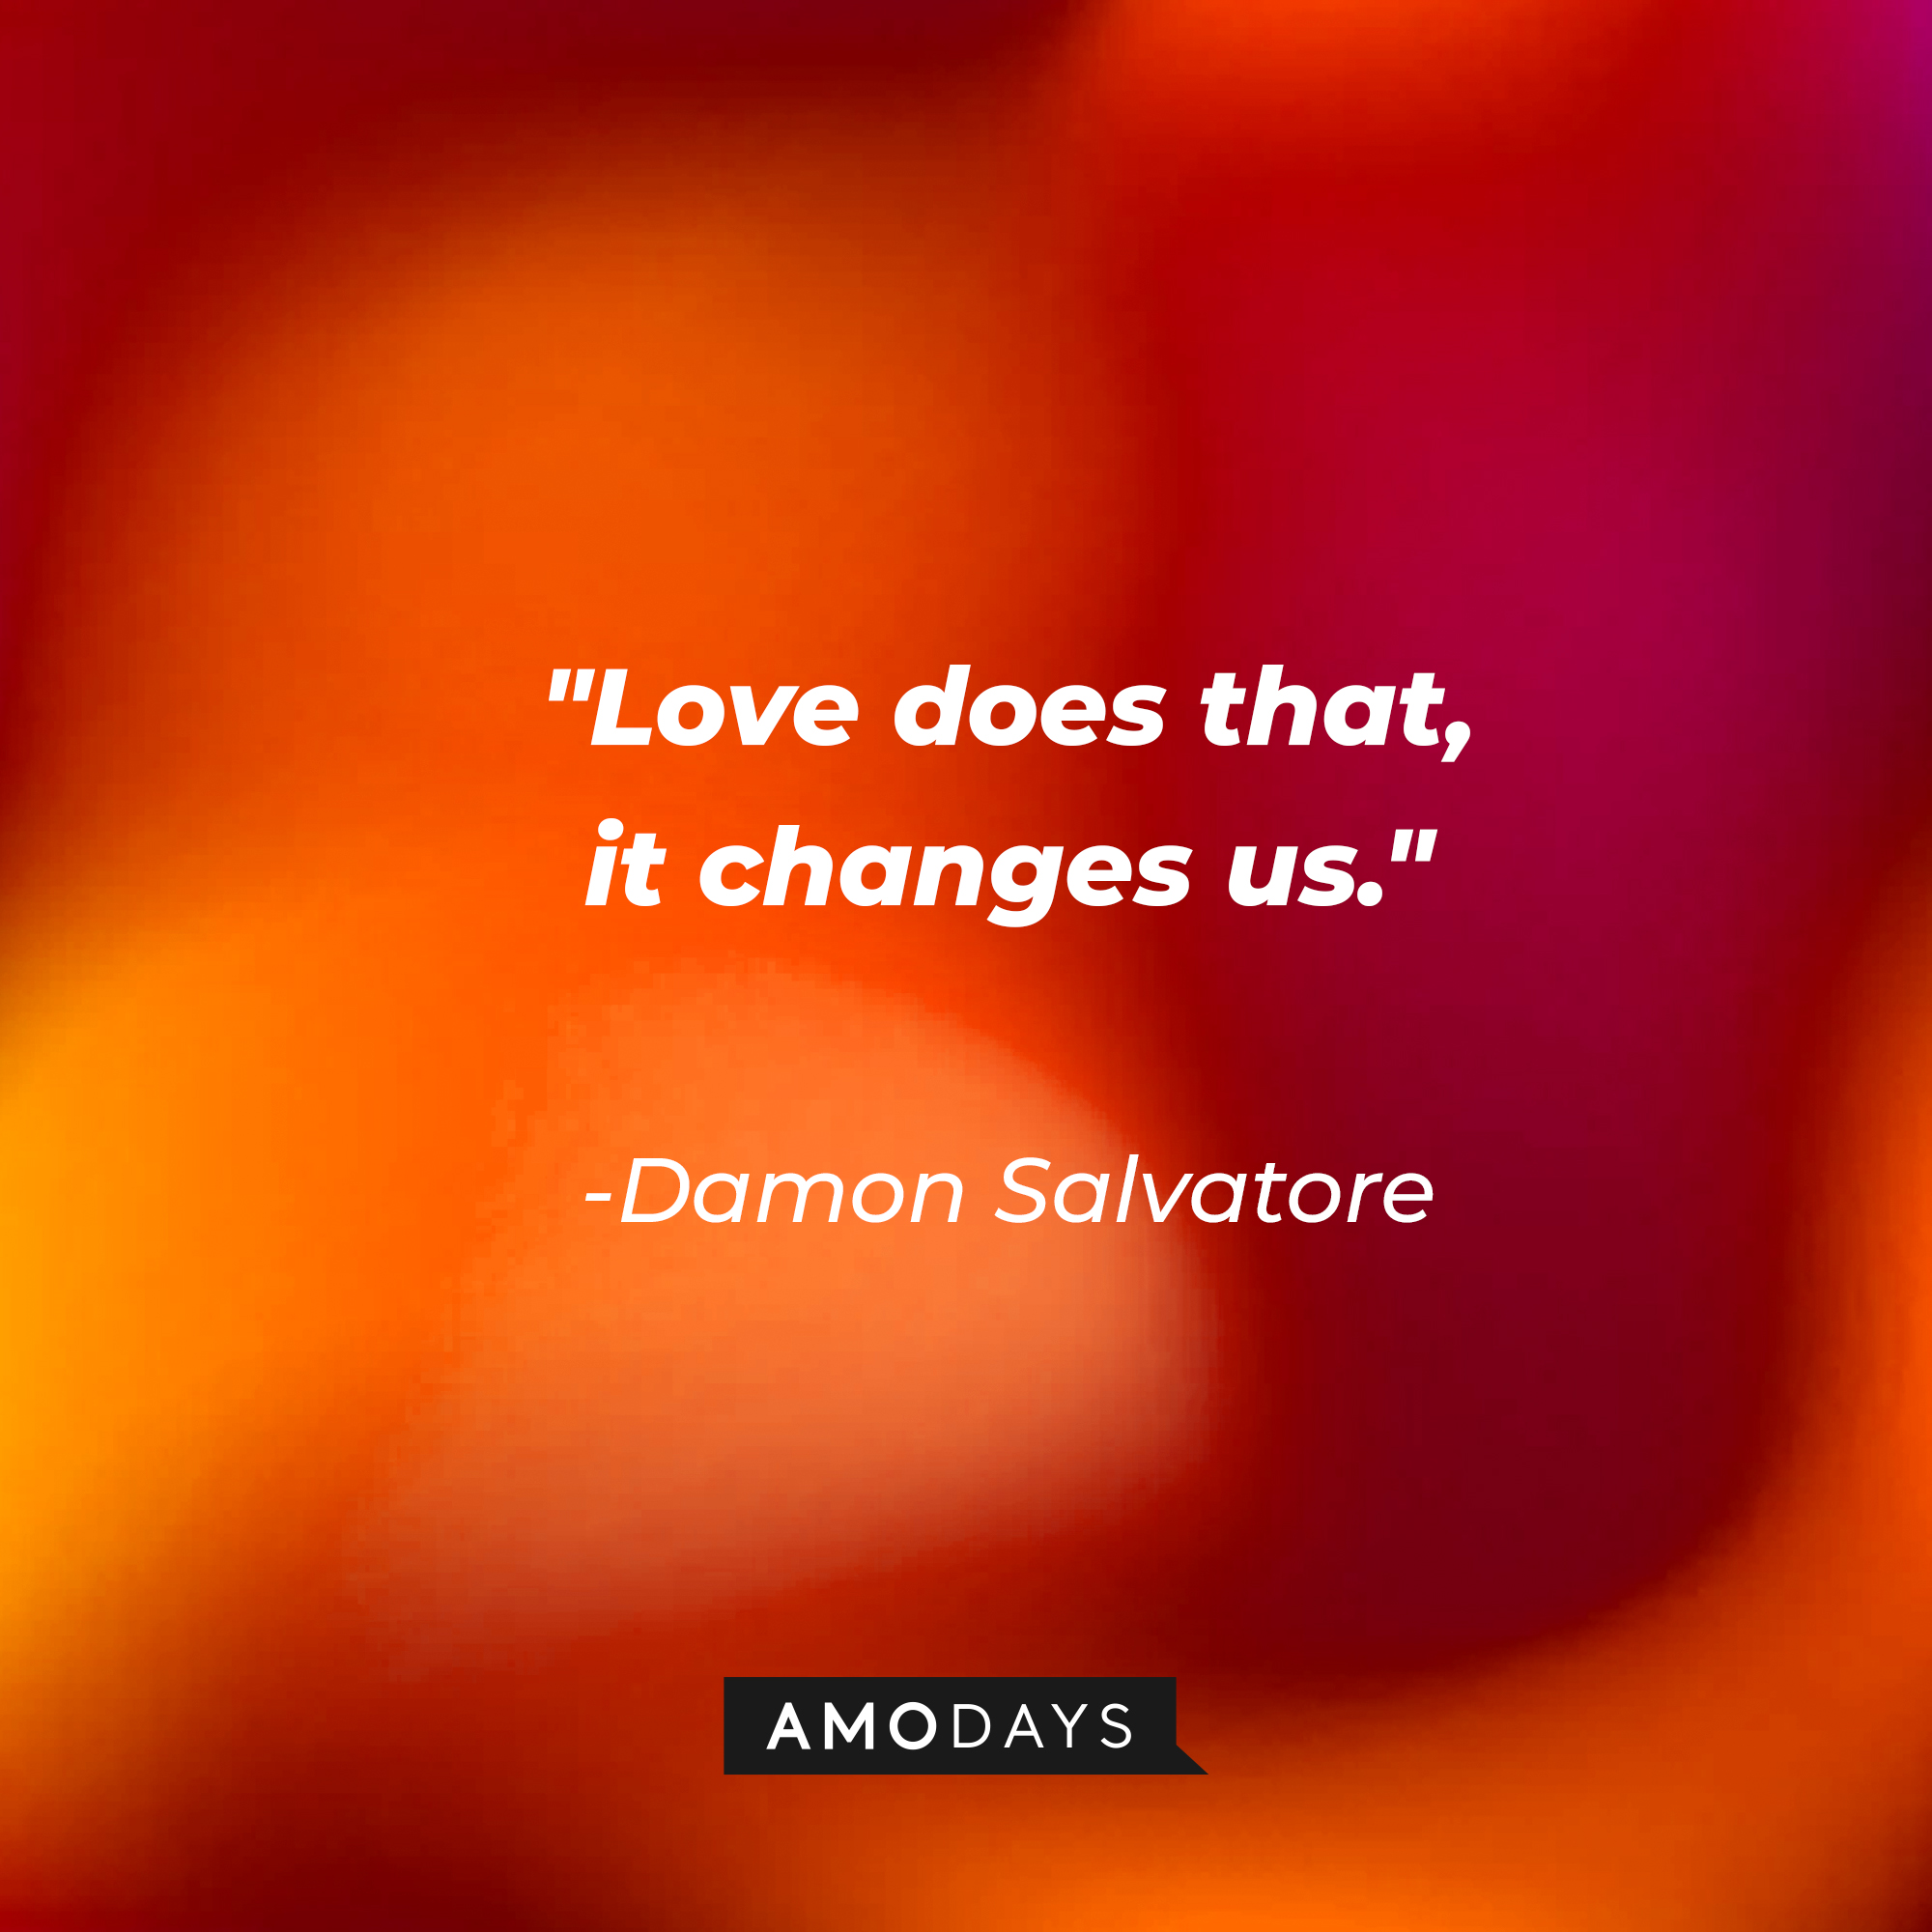 Damon Salvatore's quote: "Love does that, it changes us." | Source: Amodays